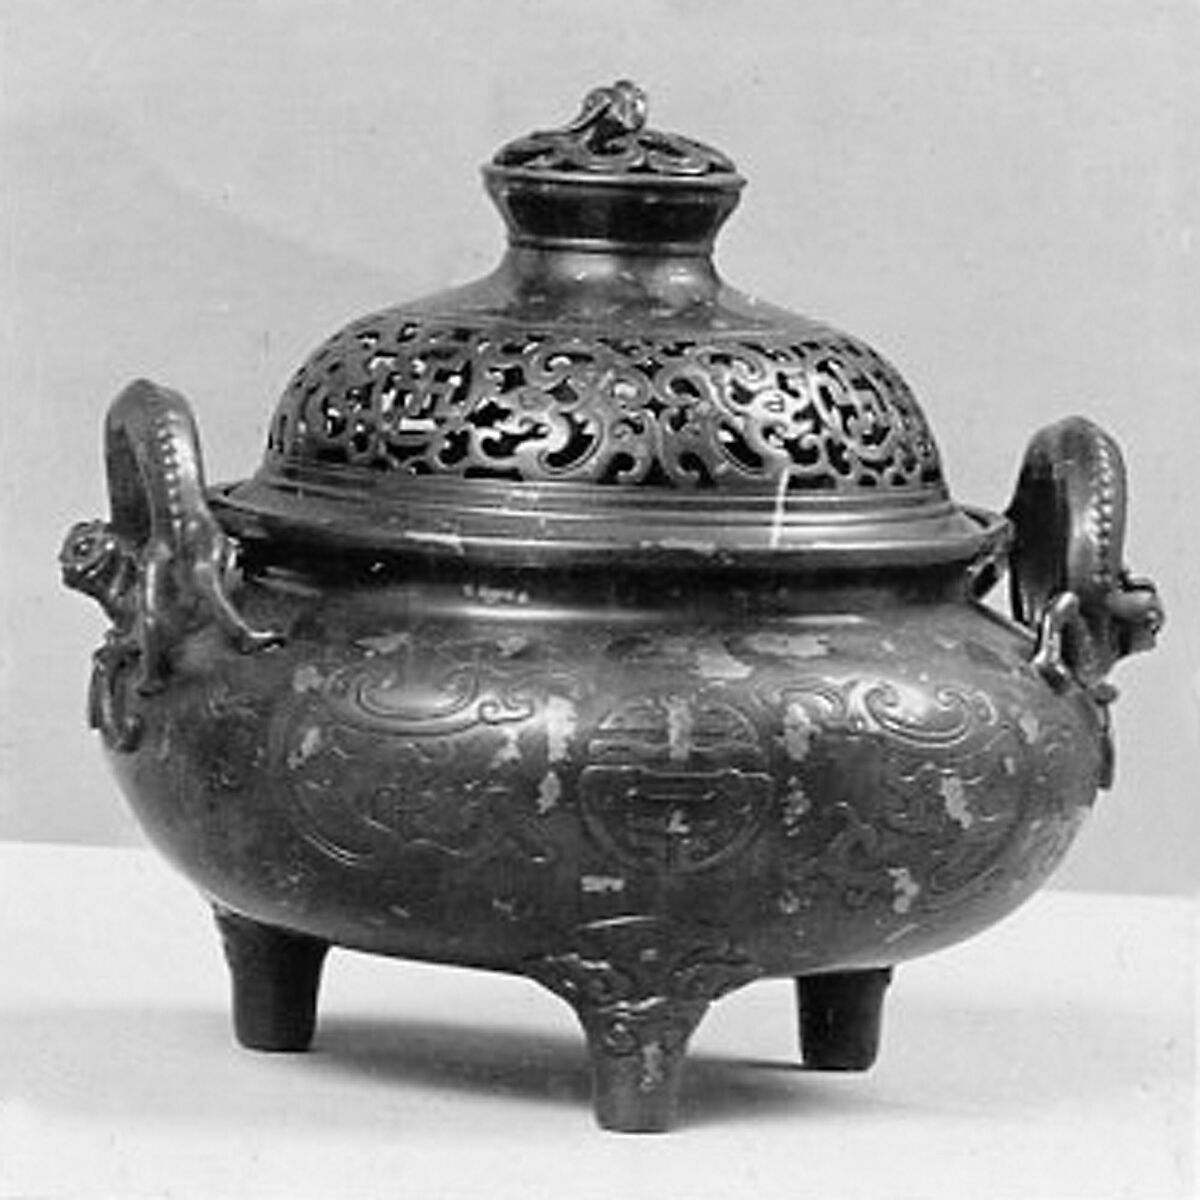 Incense burner, Brass inlaid with gold, China 